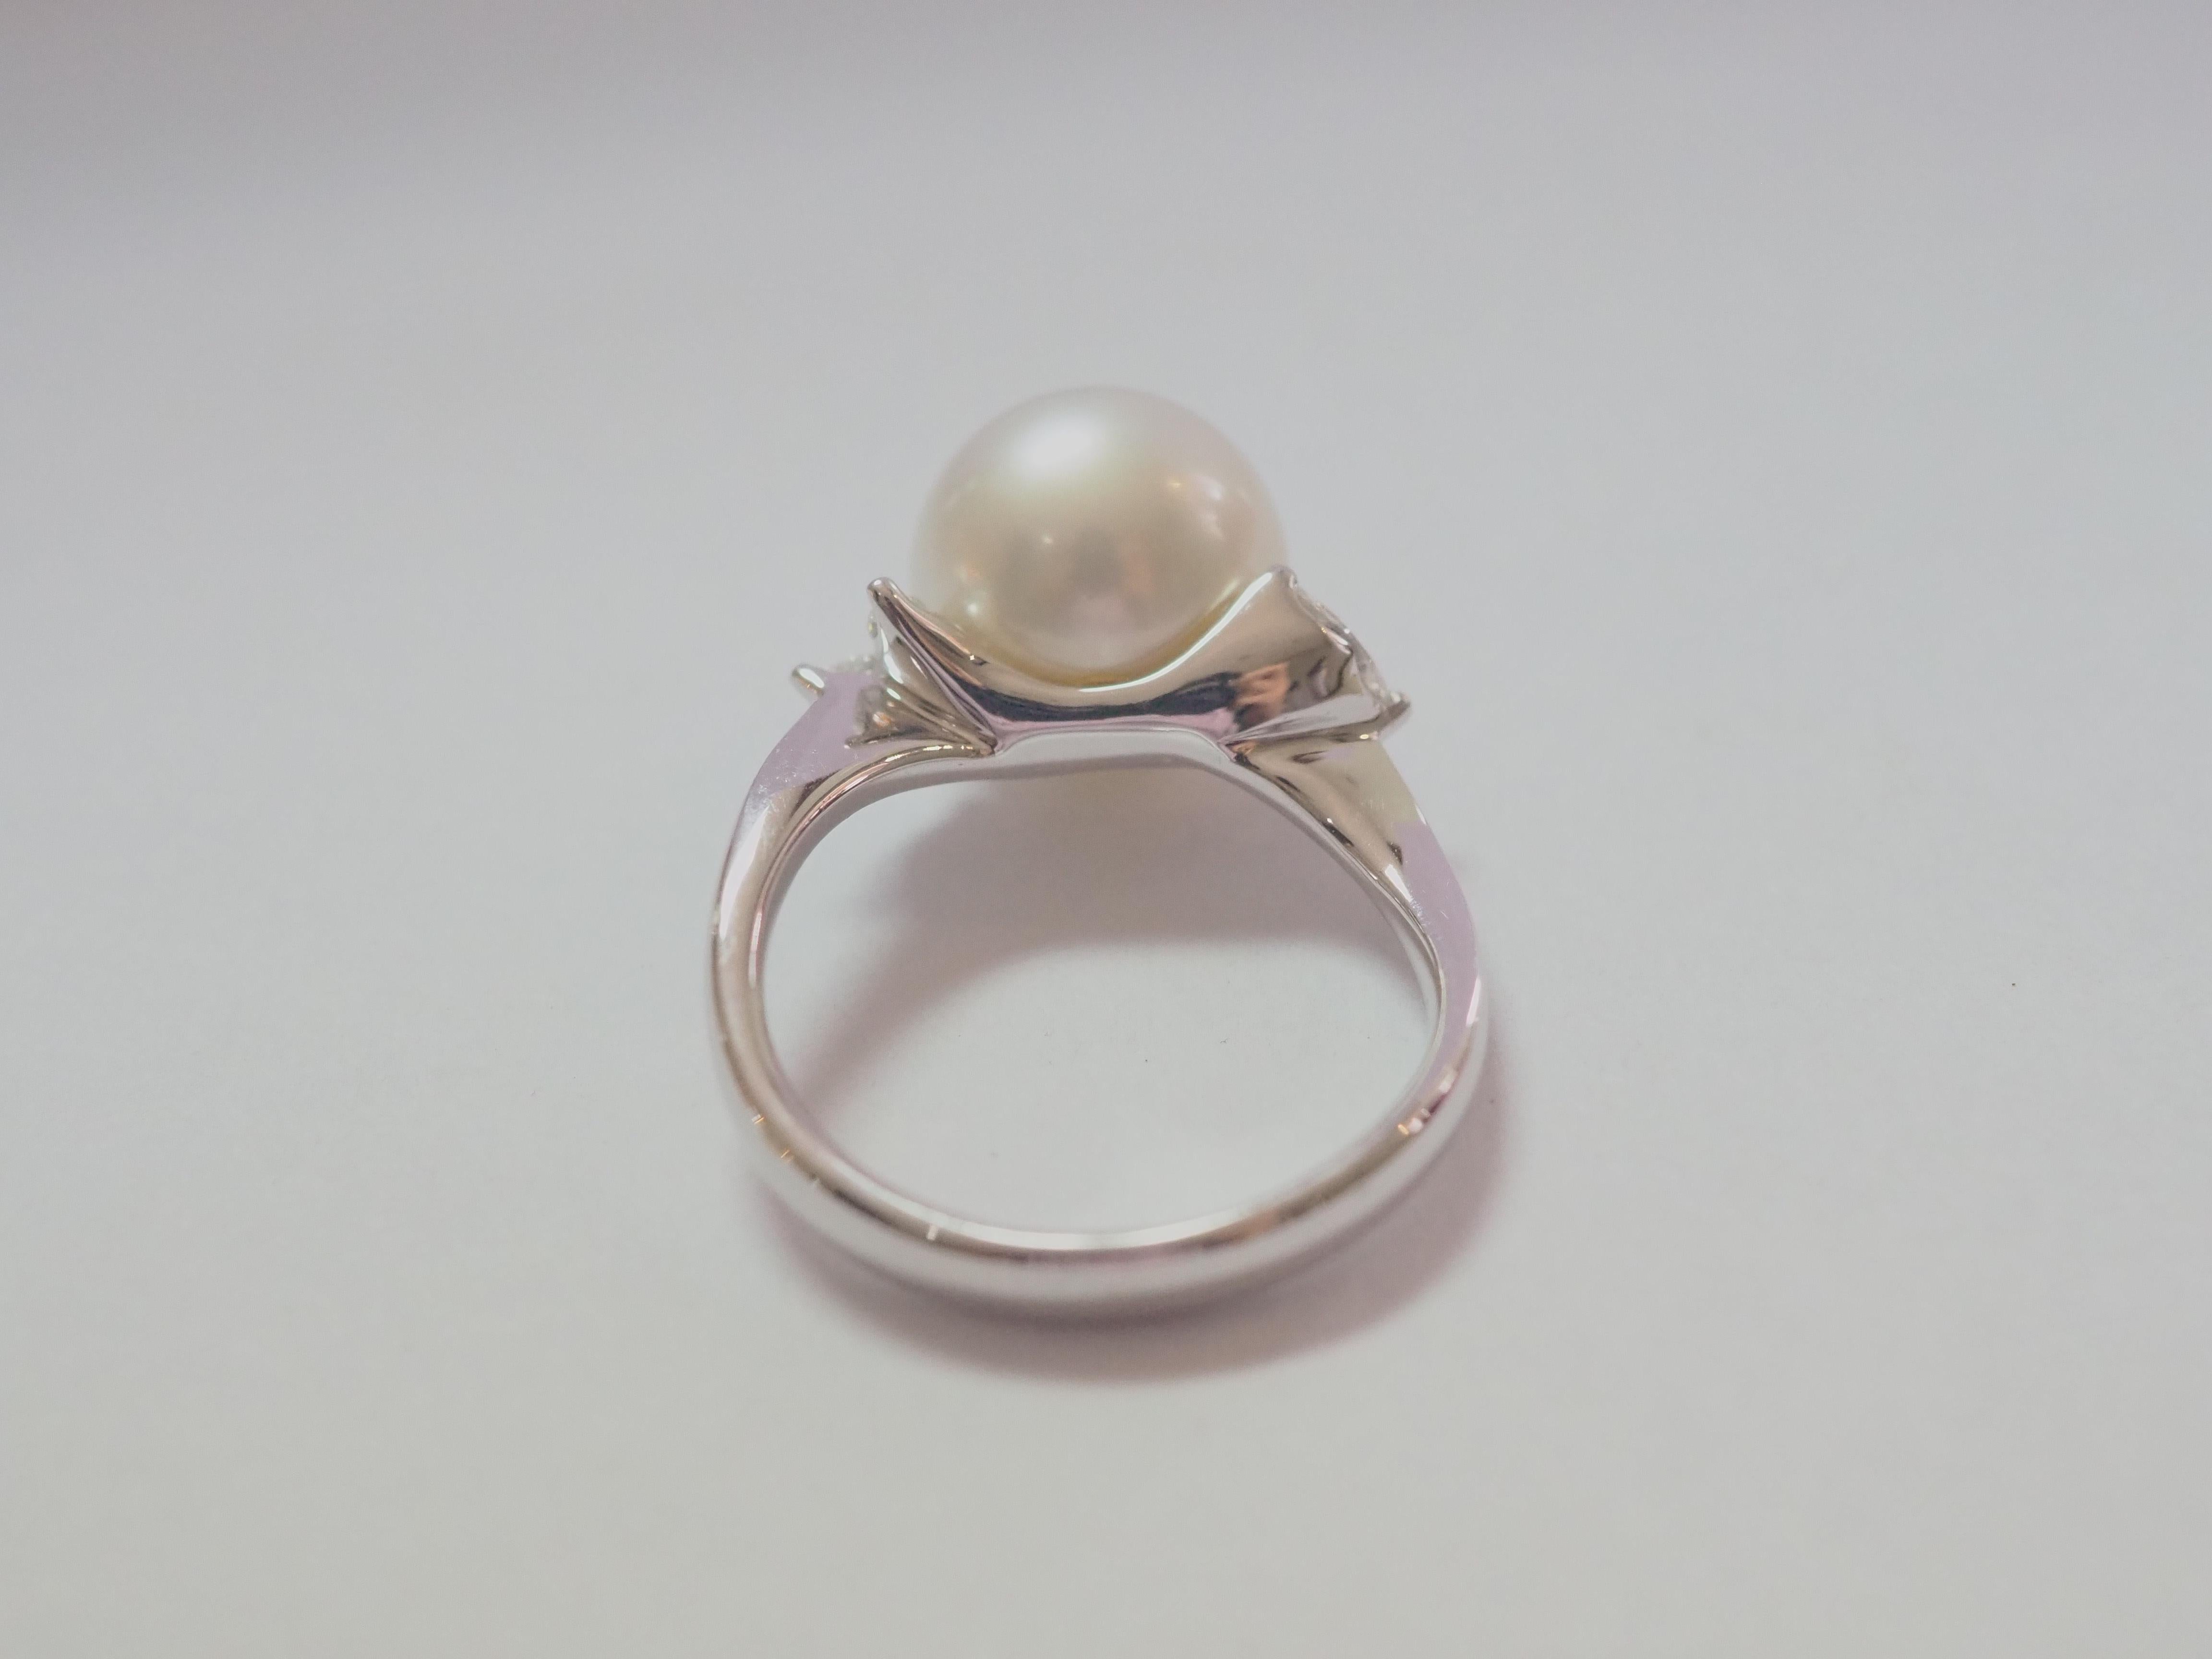 Women's 18k White Gold 11mm South Sea Pearl & 0.30ct Diamond Engagement Ring